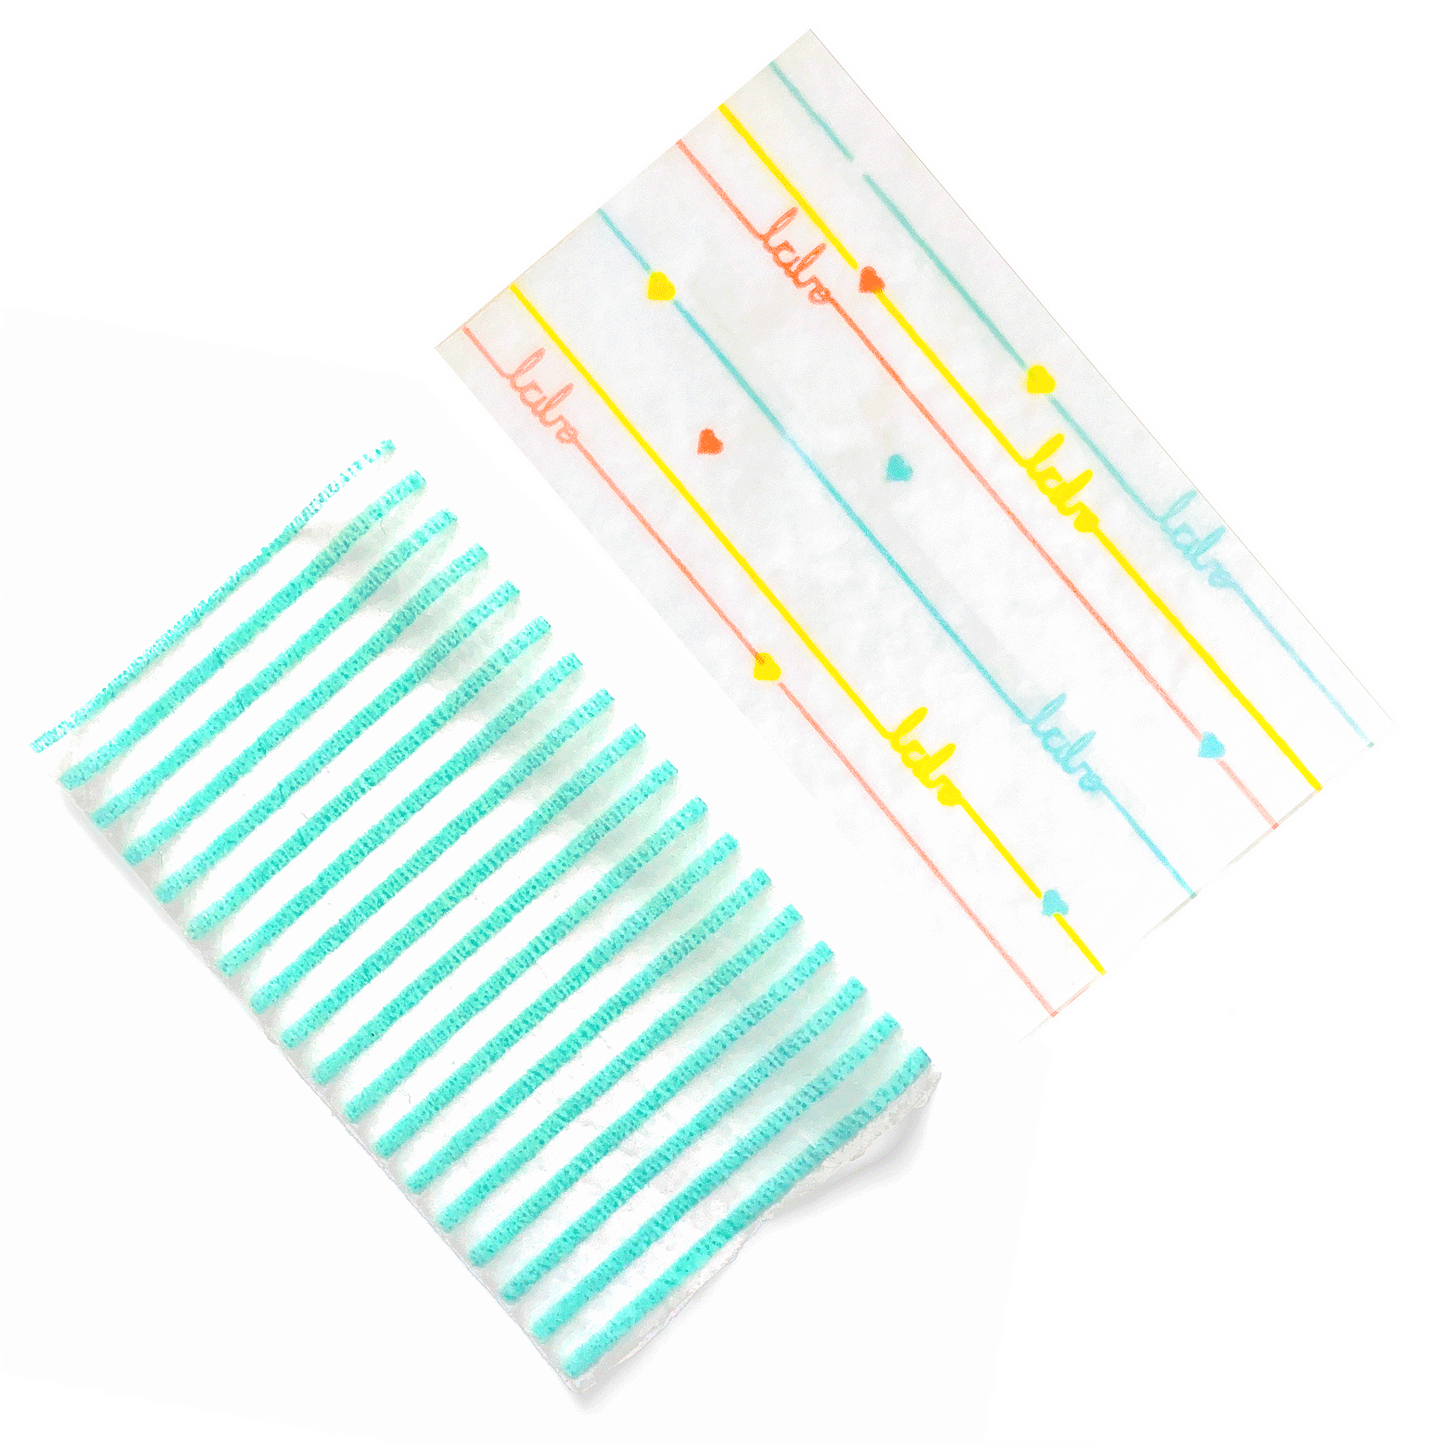 Set of three geometric papers. These designer rolling papers are girly, pretty, vegan, cute, cool, standard size, high quality, even burn, natural dyes, best tasting, slow burn.